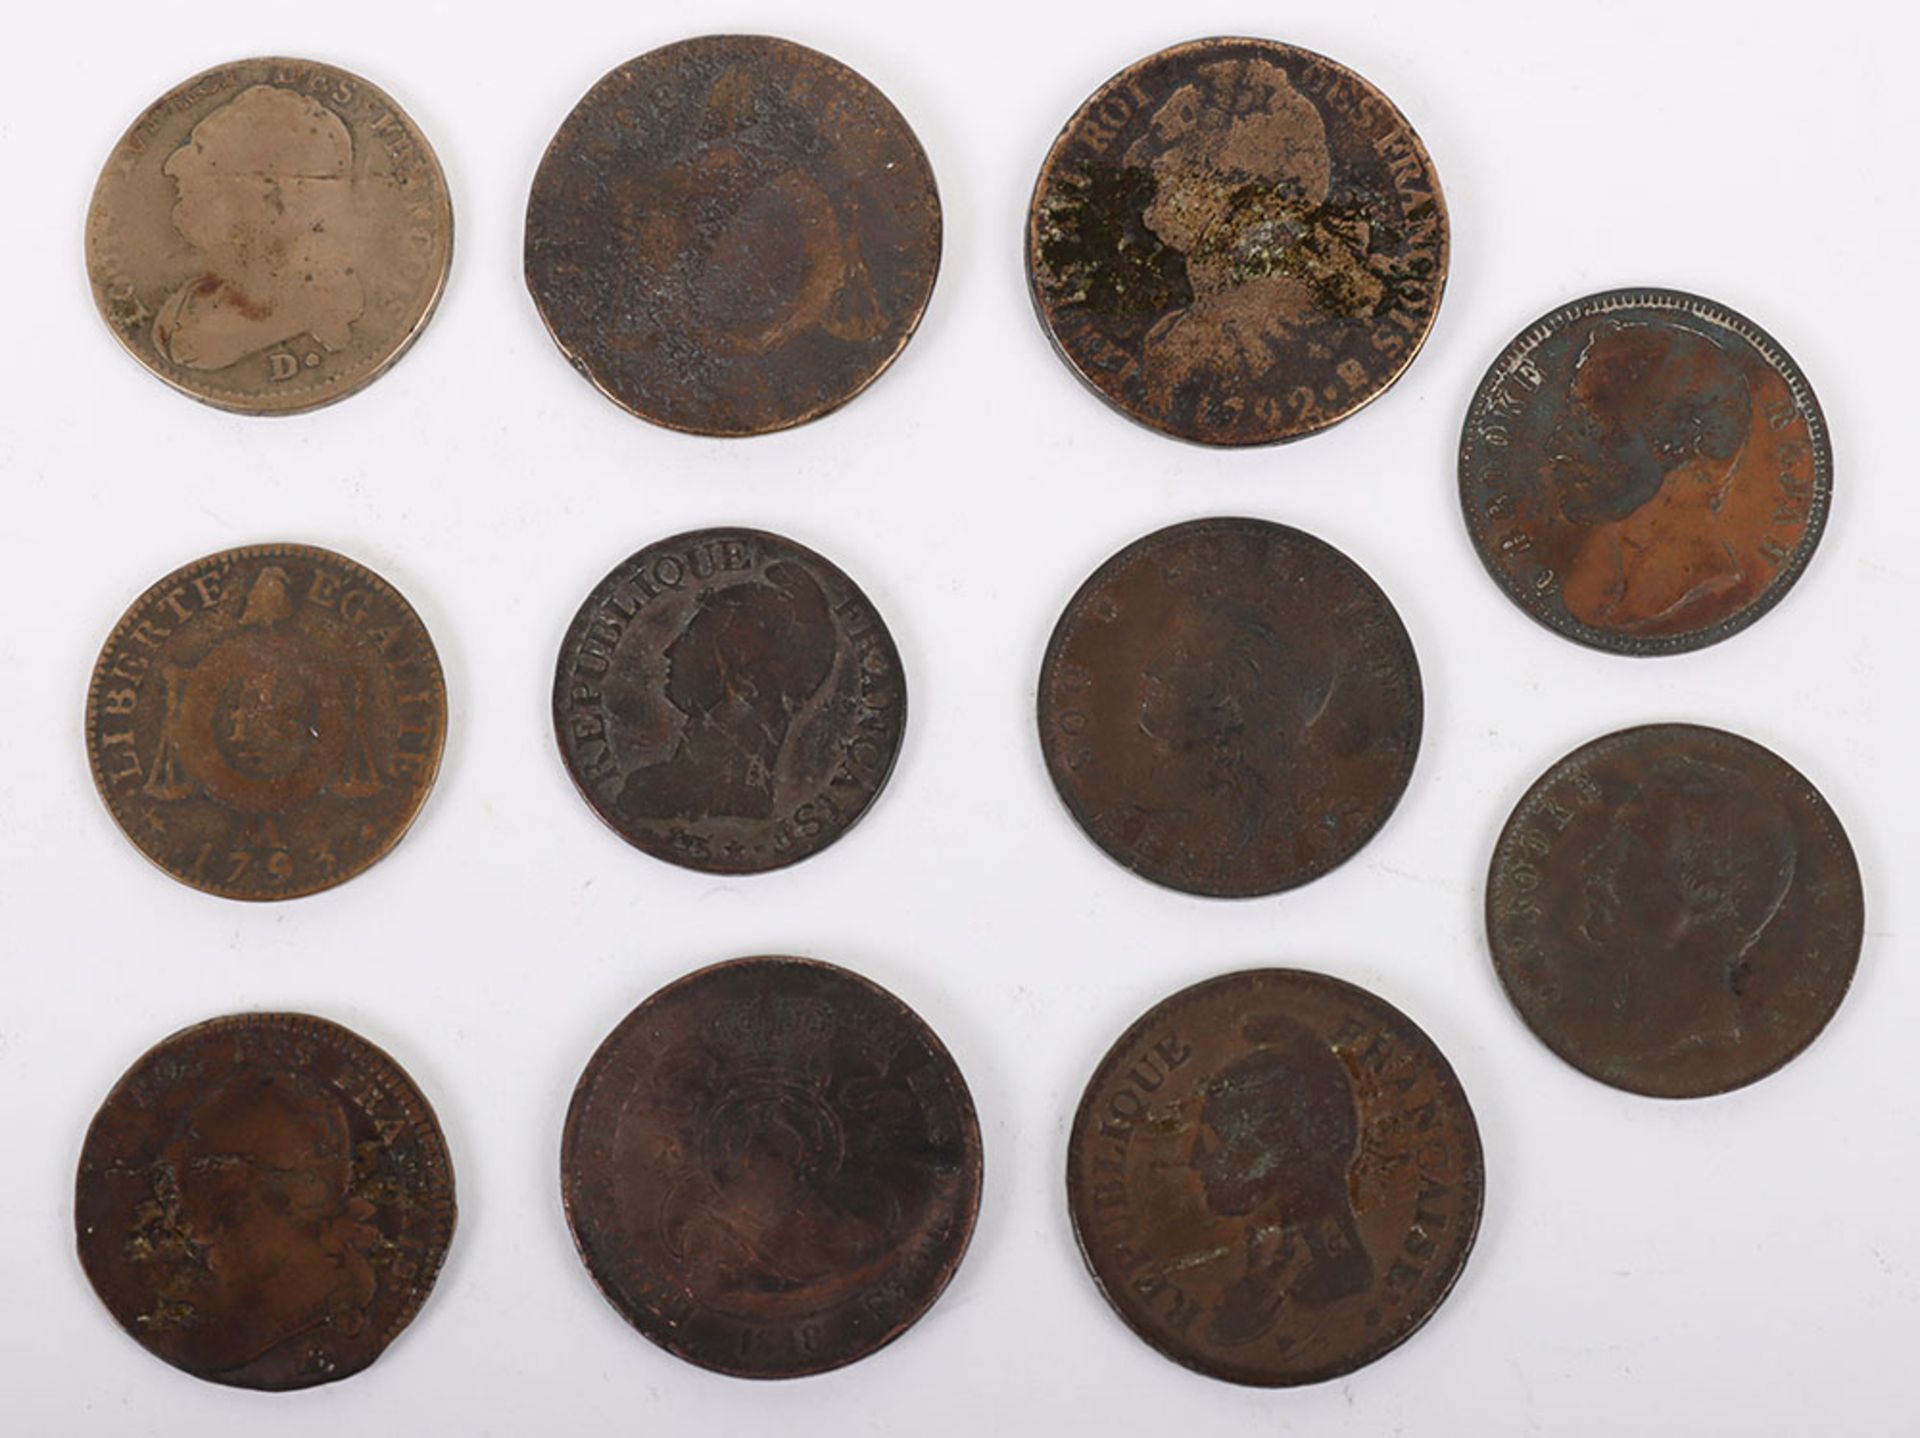 A selection of 18th and 19th century European coinage